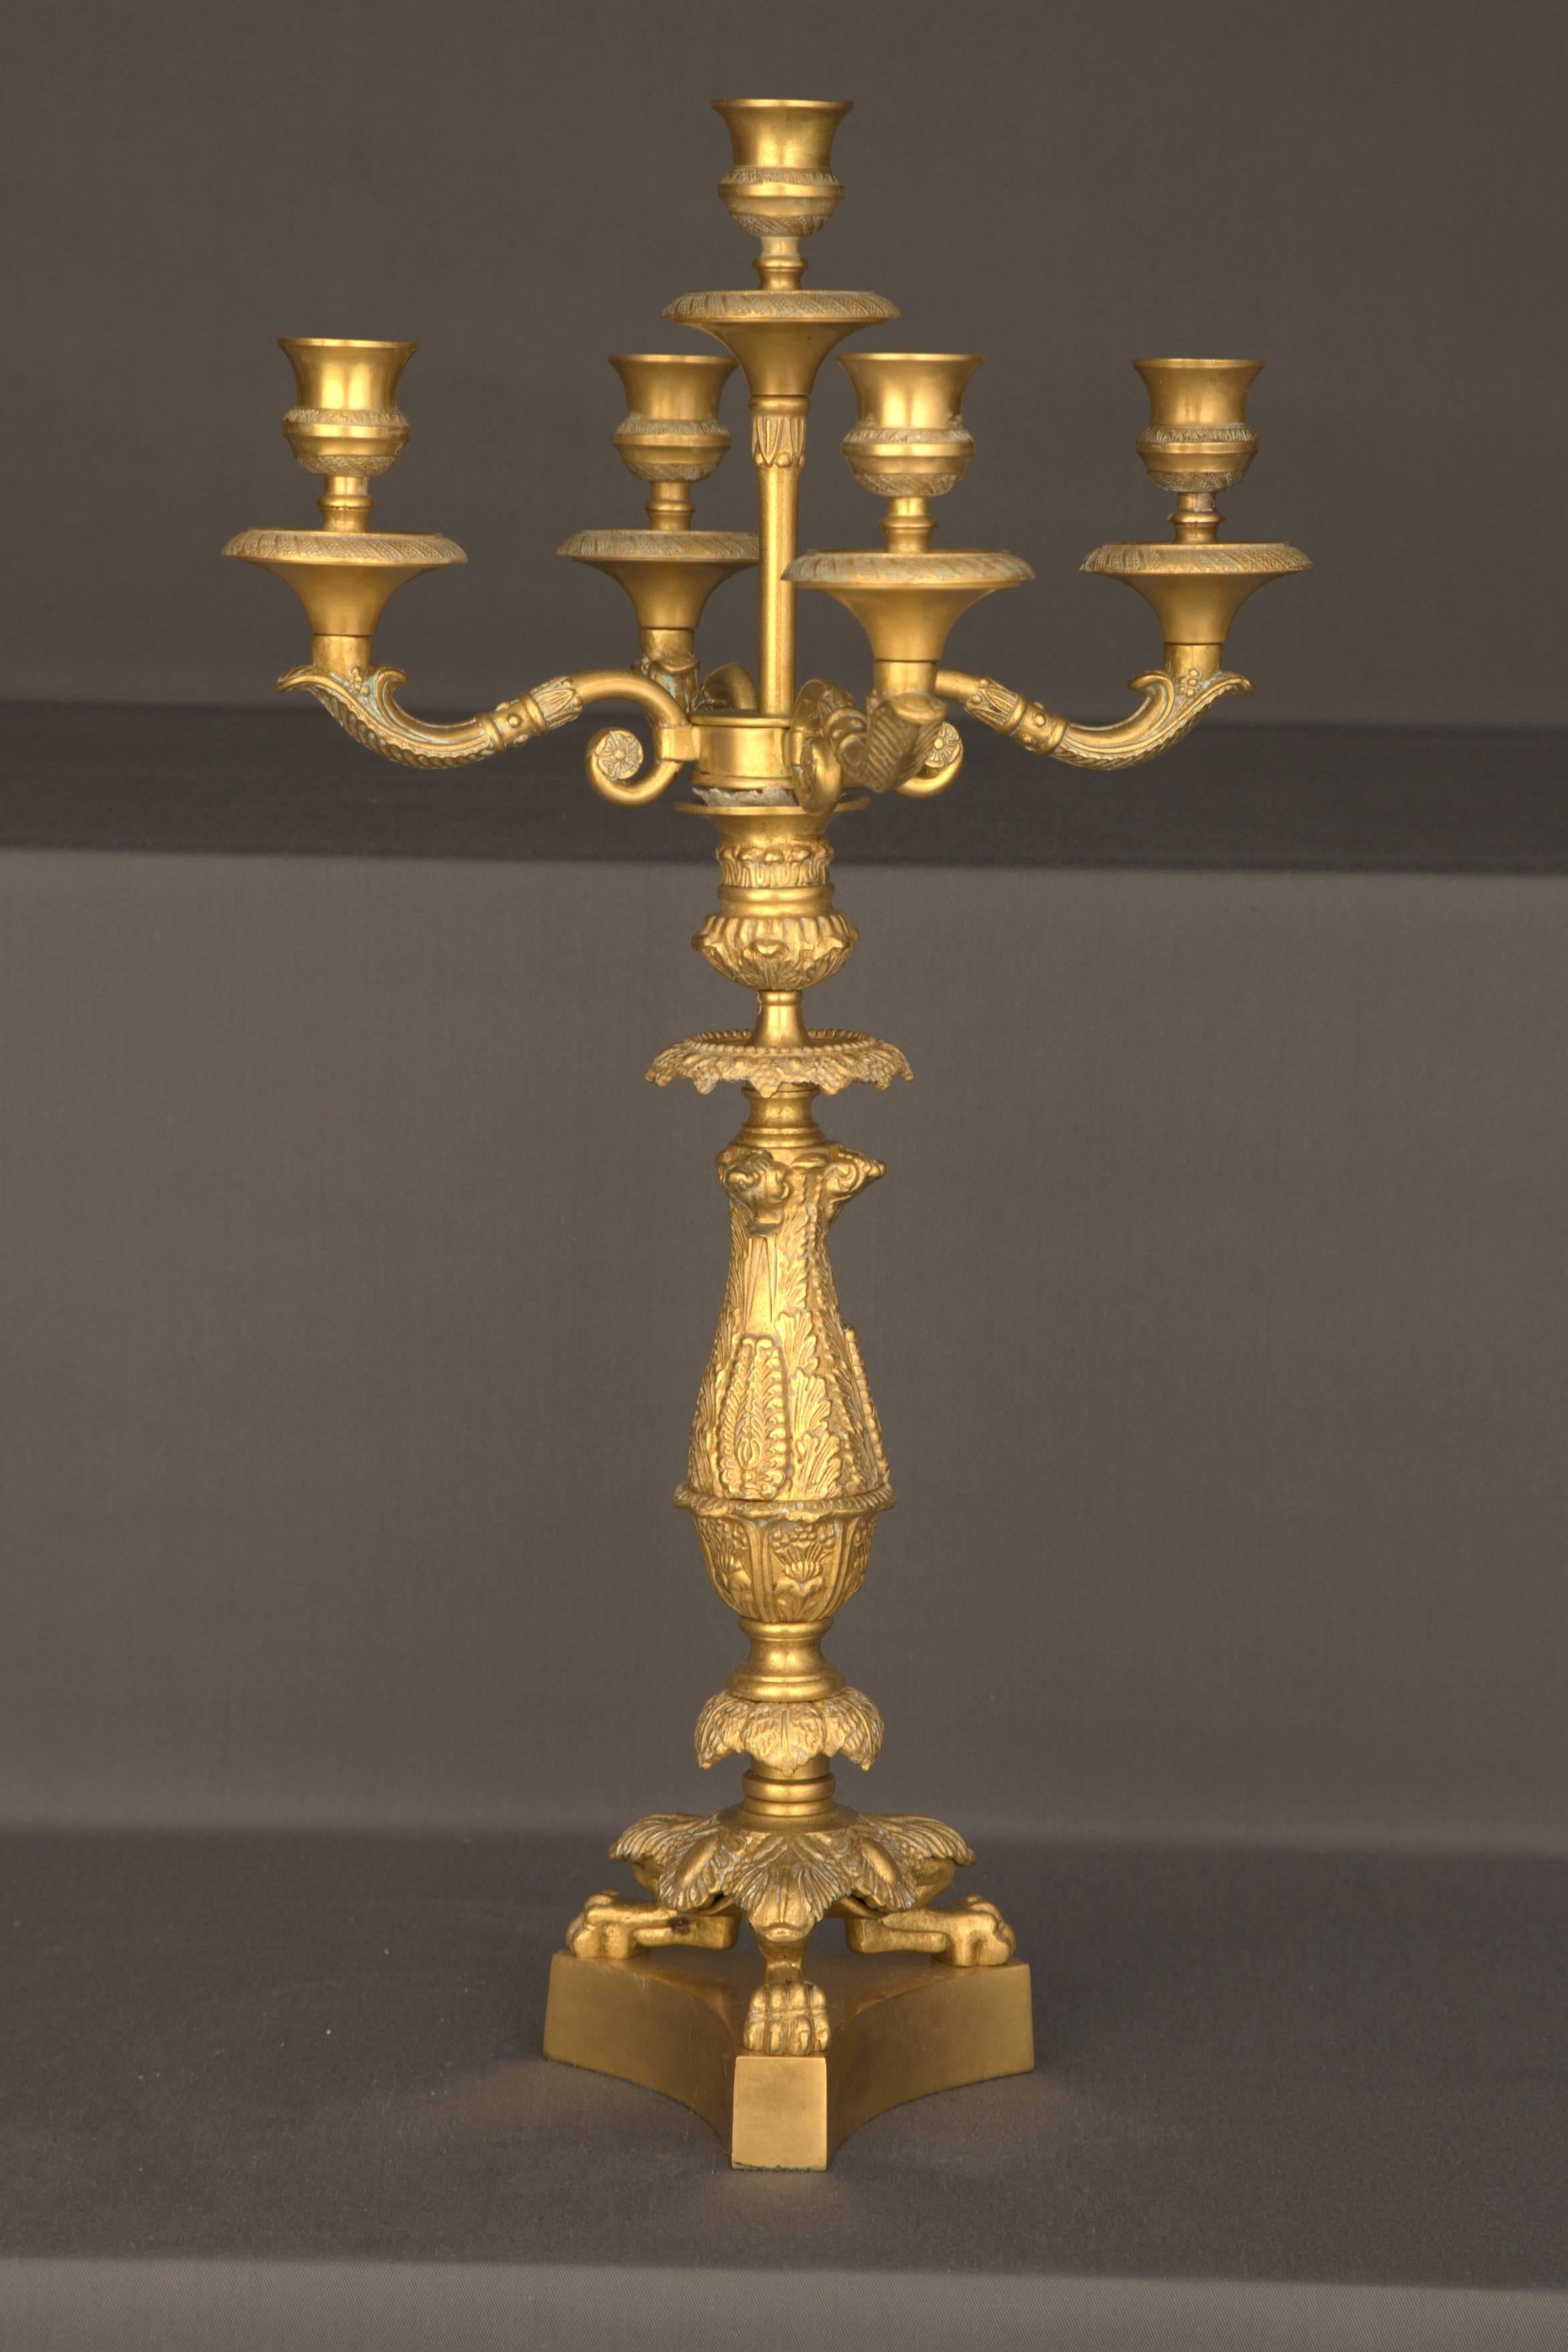 Bronze, finely engraved. Column-shaft as holder for four Sweeping
candelabra arms. 
Diameter:30cm
height:52 cm.